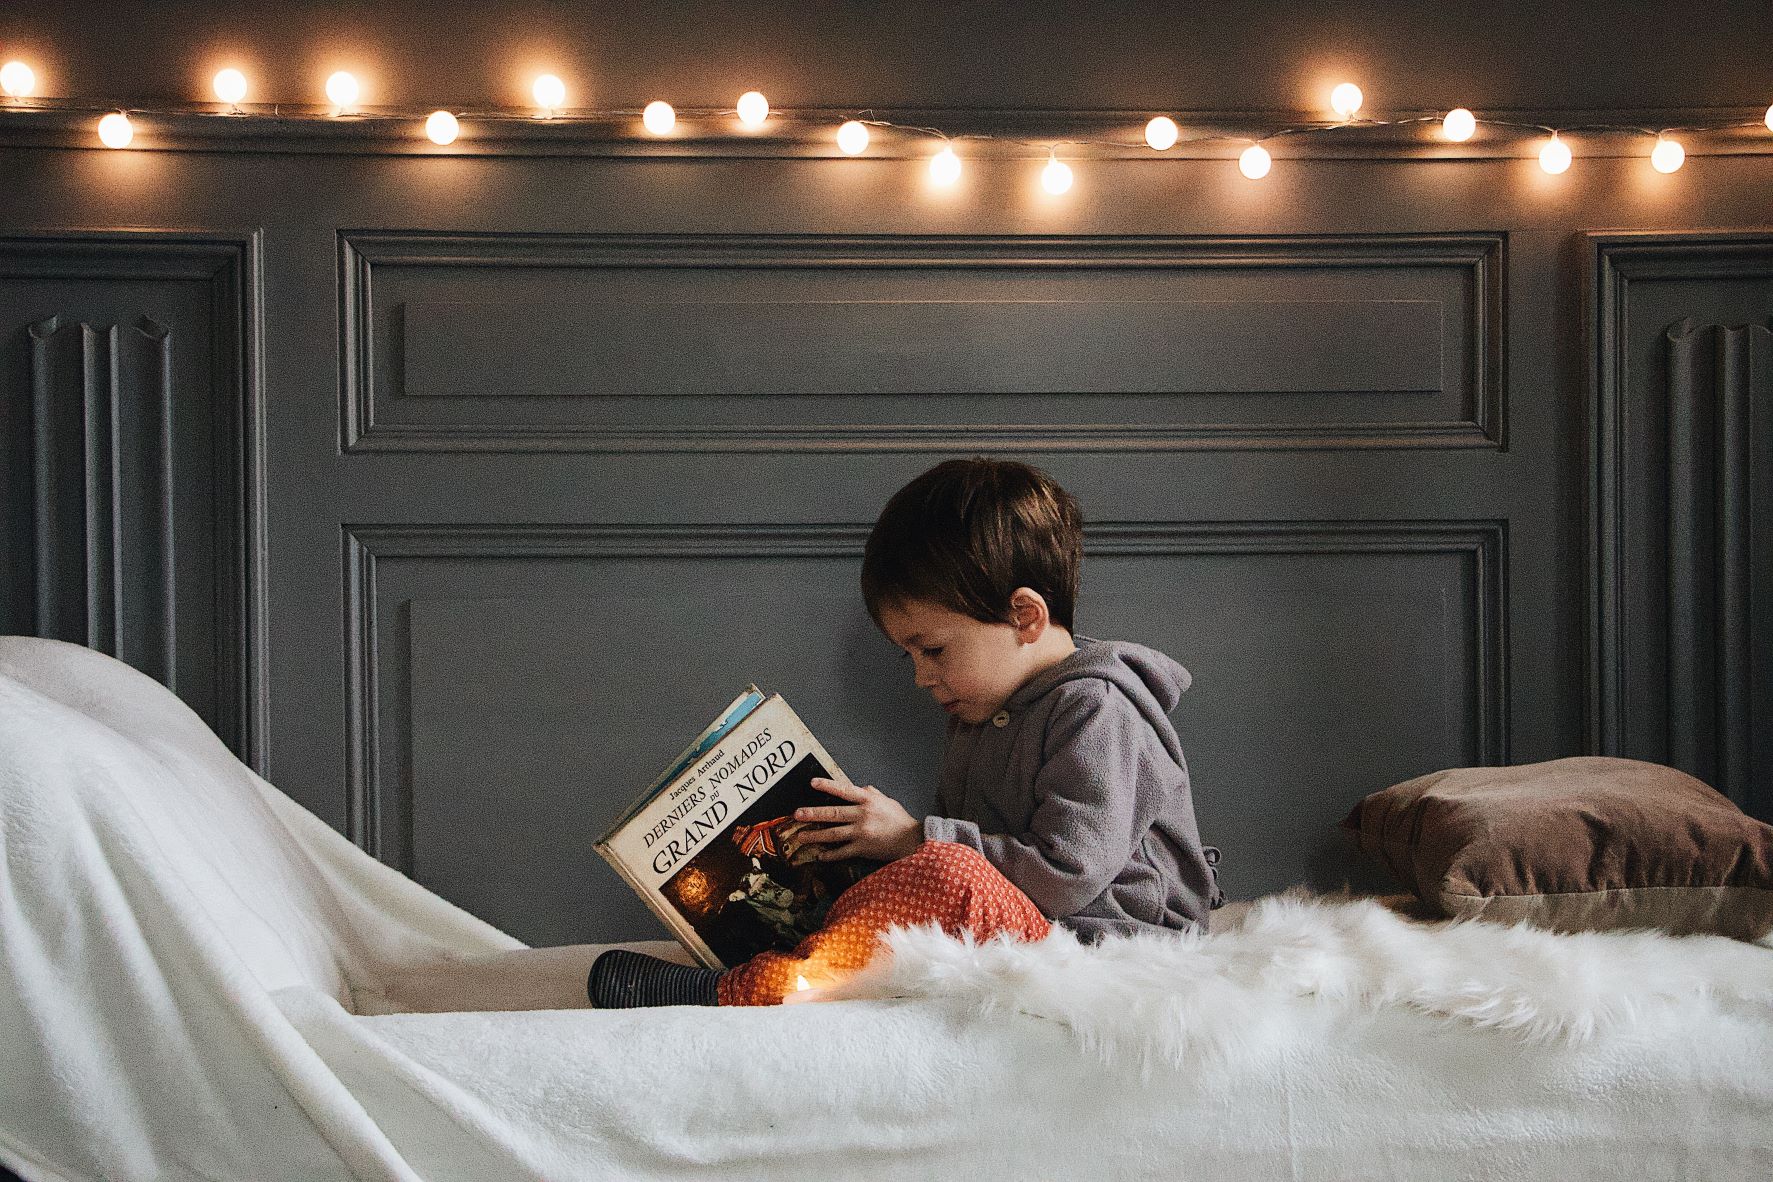 The Comprehensive Guide to Choosing and Using Lighting Accessories in Your Child's Room